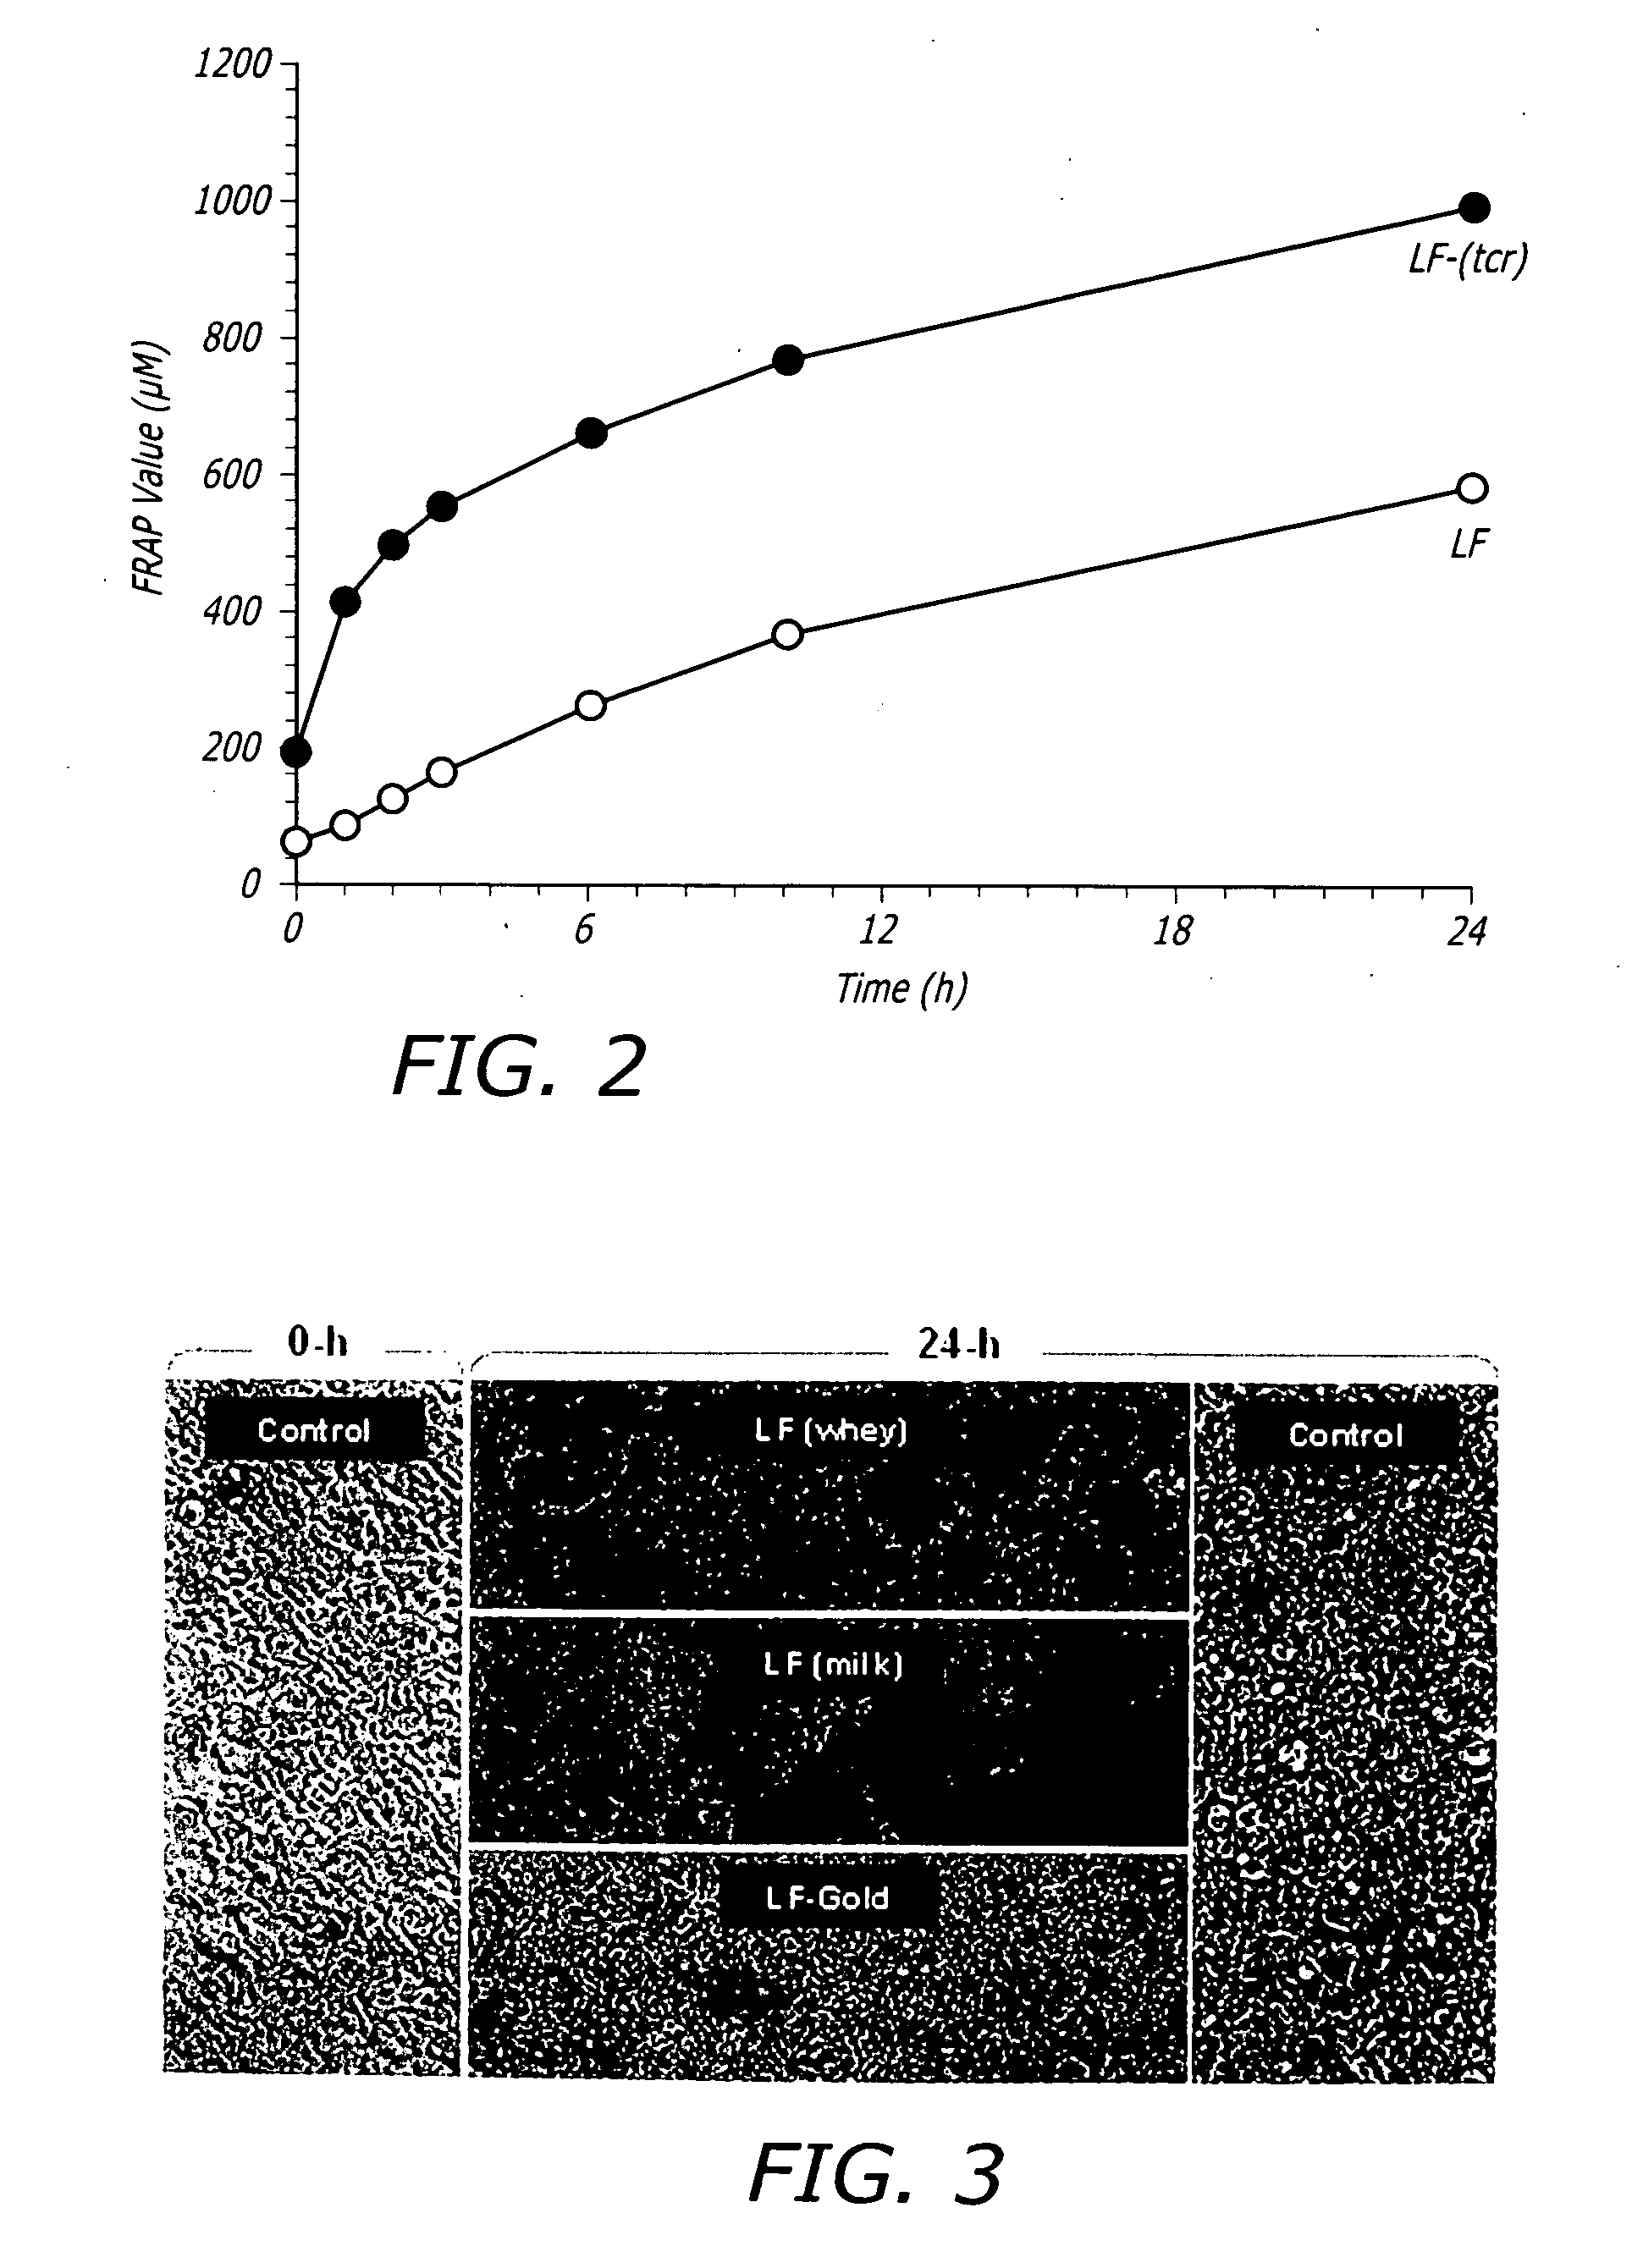 Treatments for contaminant reduction in lactoferrin preparations and lactoferrin containing compositions